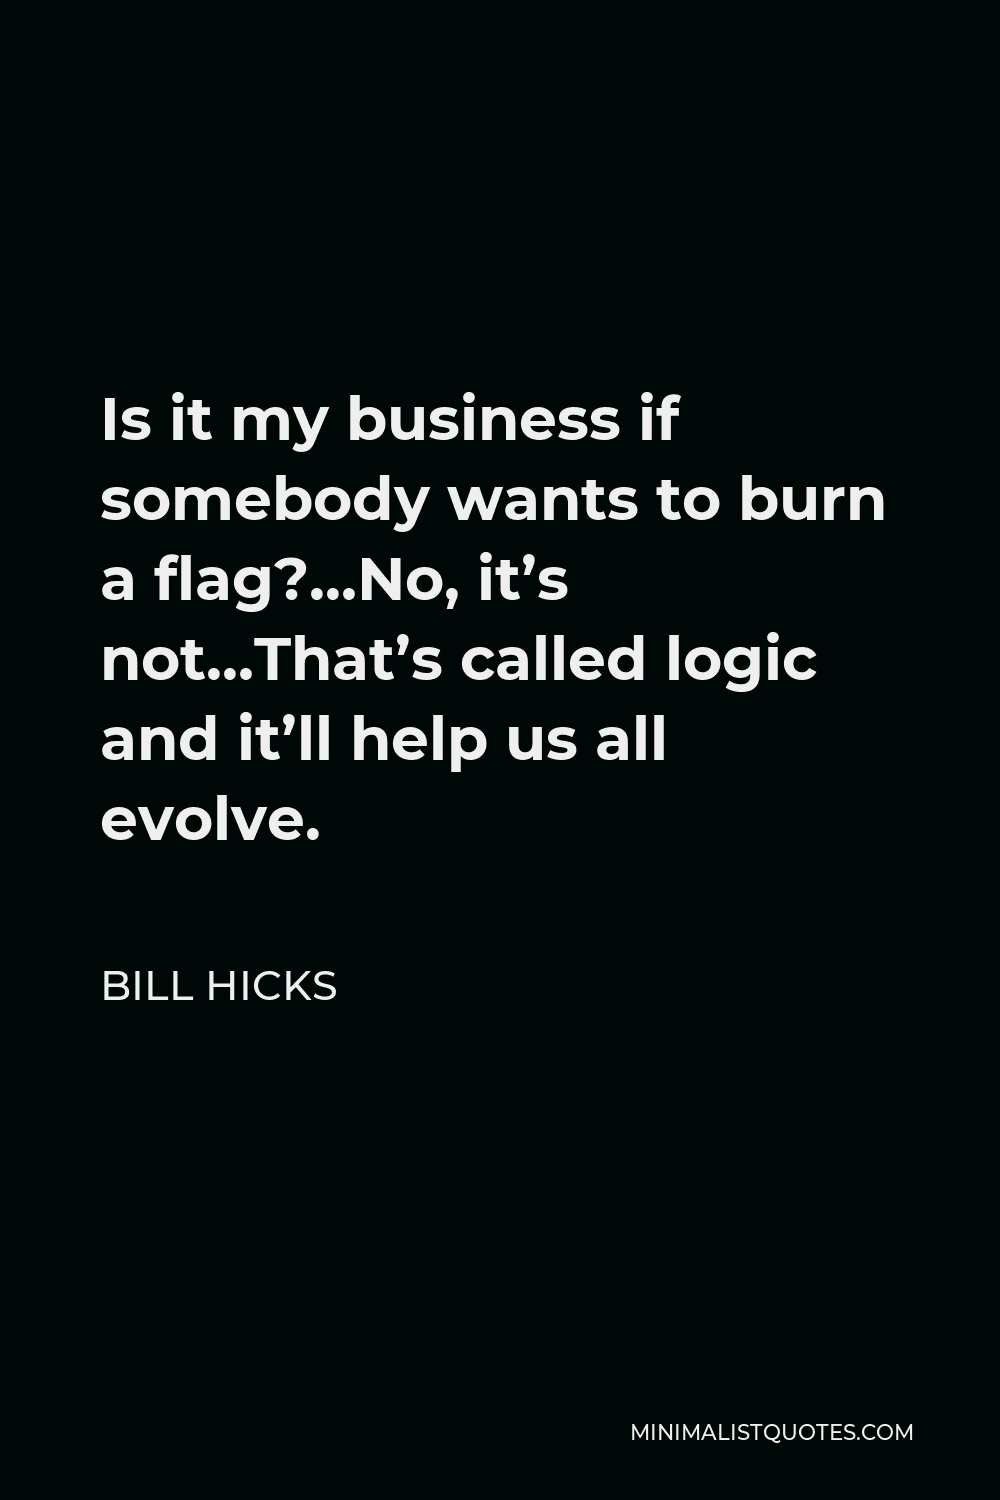 Bill Hicks Quote - Is it my business if somebody wants to burn a flag?…No, it’s not…That’s called logic and it’ll help us all evolve.